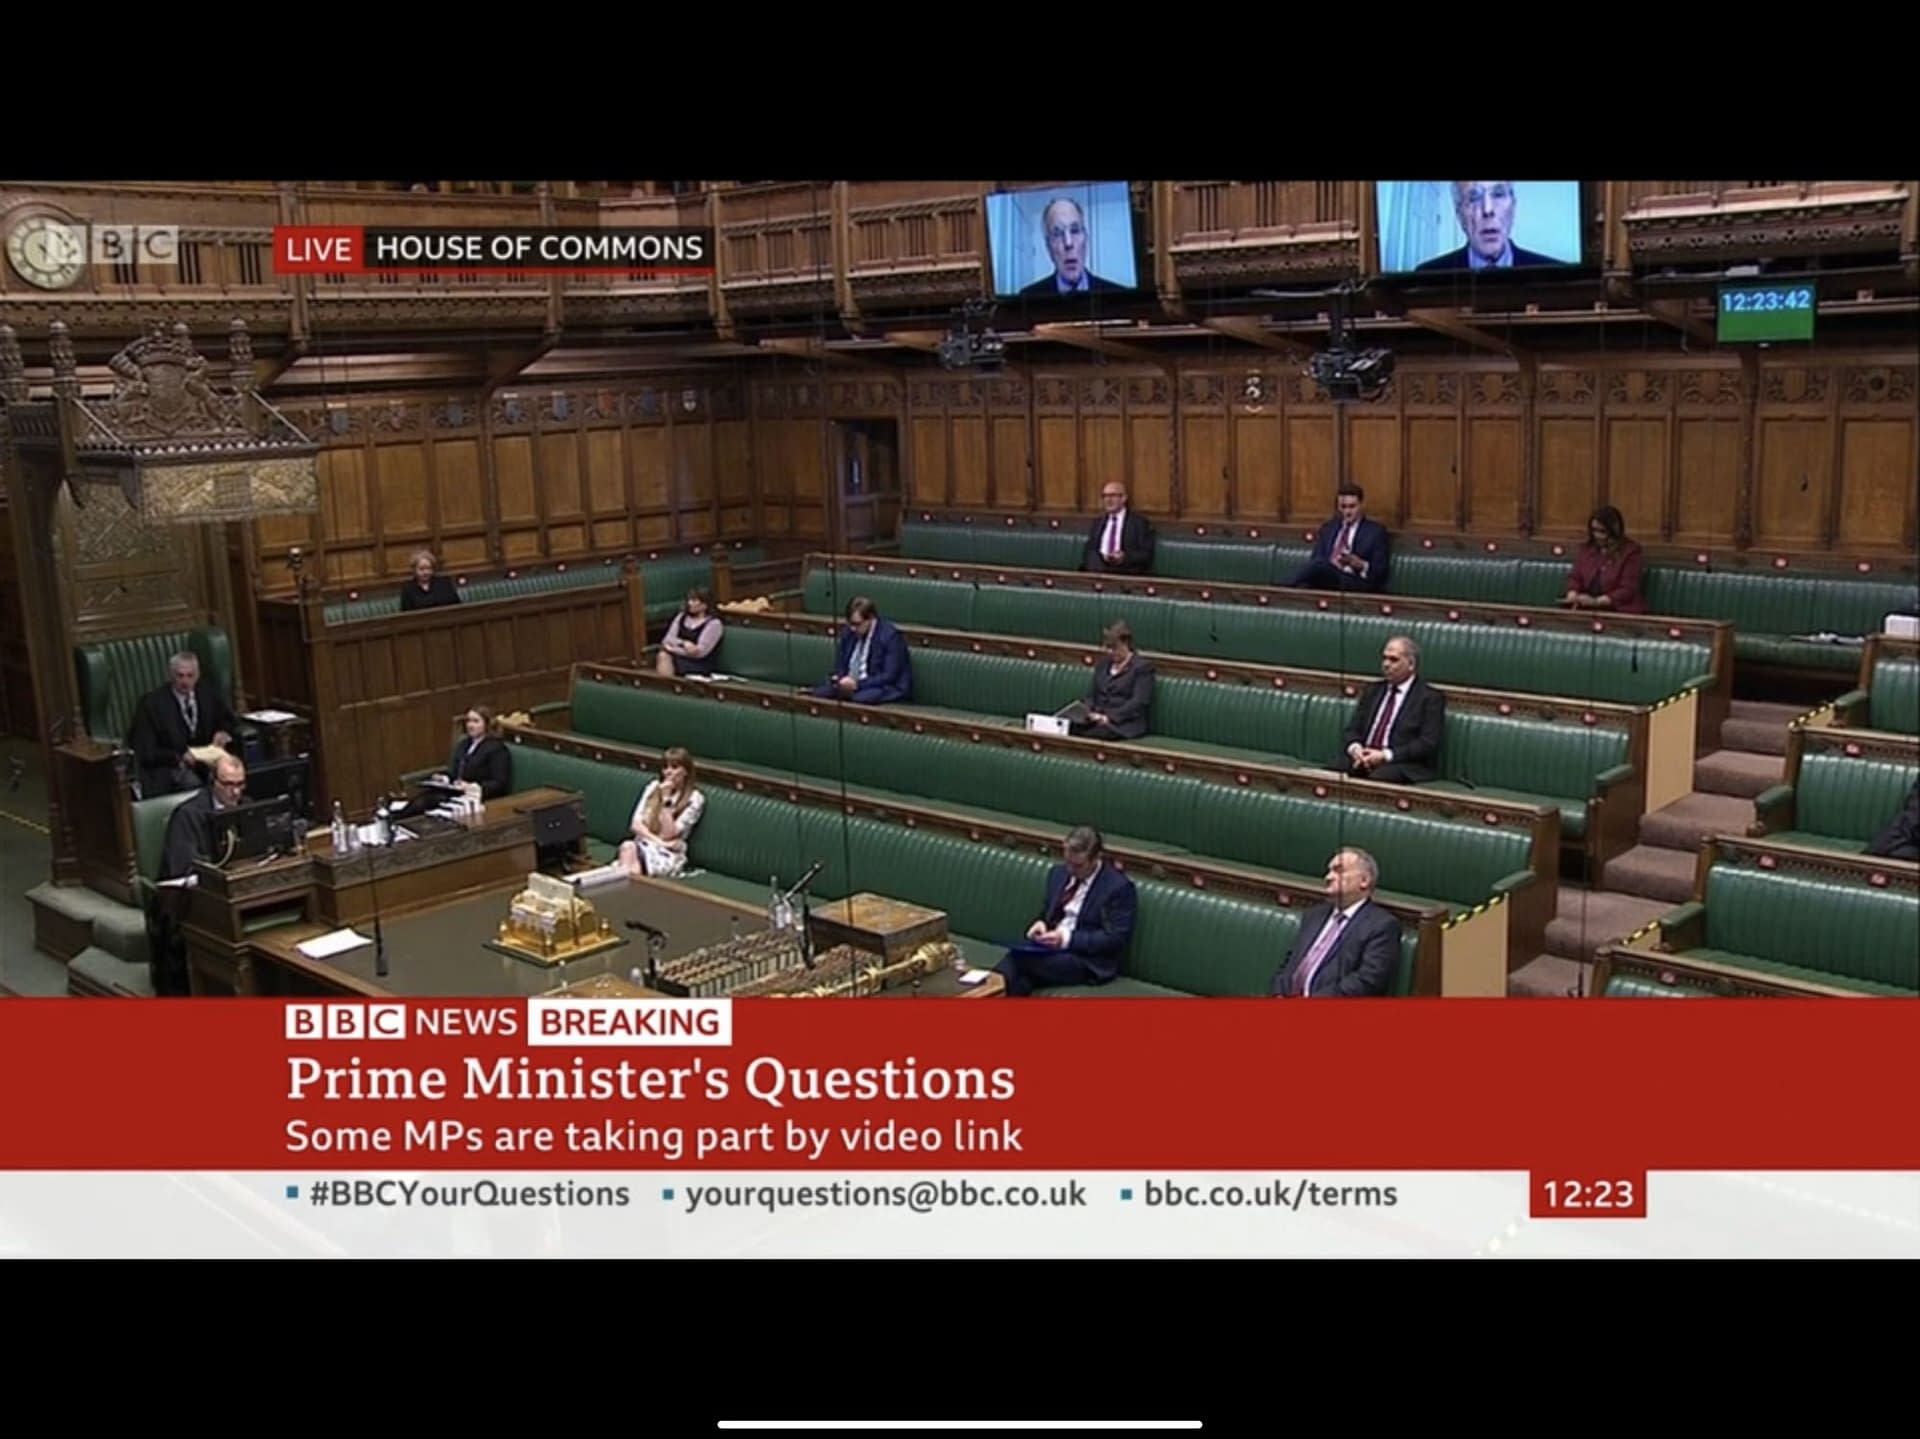 Today, Prime Minister’s Question Time Went SemiVirtual